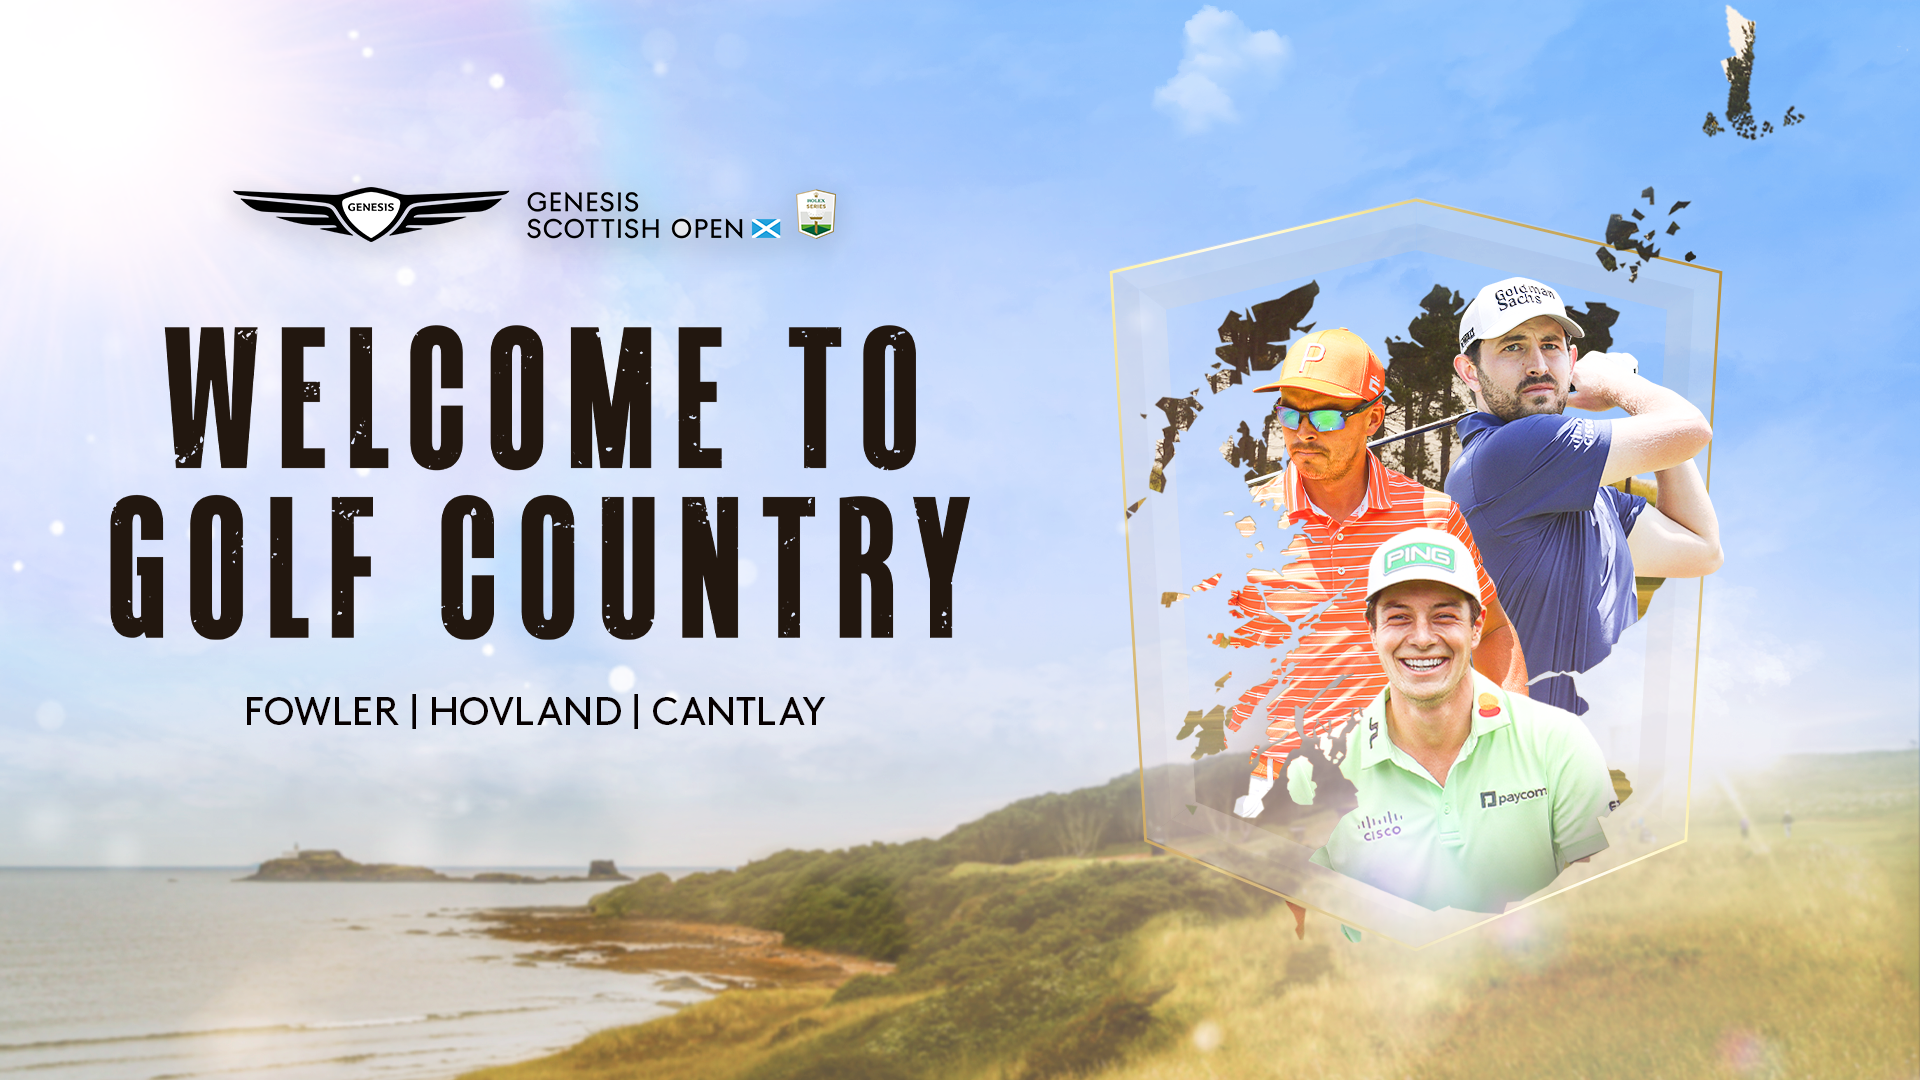 Viktor Hovland, Patrick Cantlay and Rickie Fowler bring further star power to the Genesis Scottish Open